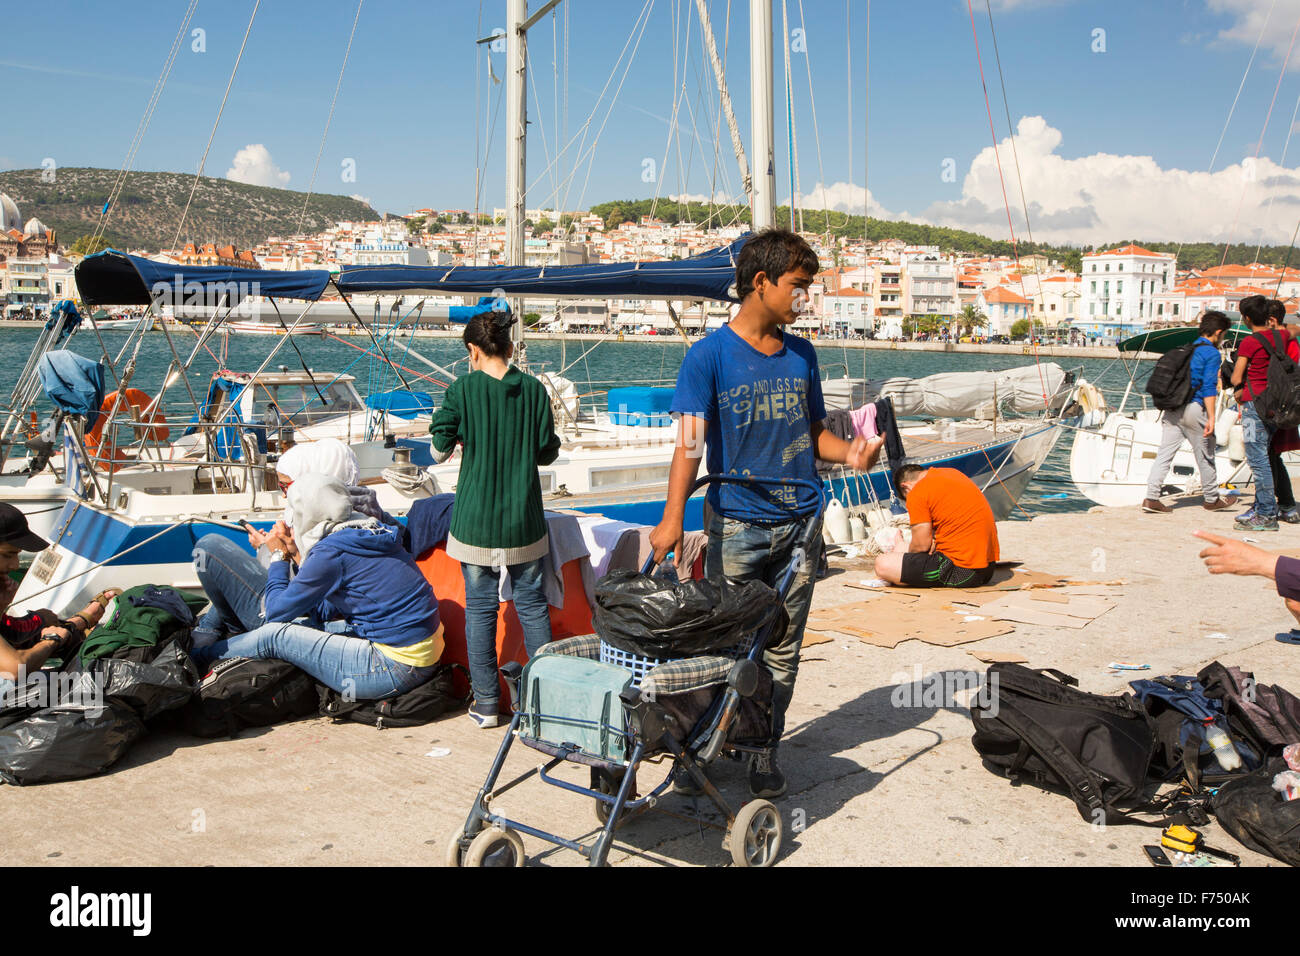 Syrian migrants fleeing the war and escaping to Europe,  who have landed on the Greek island of Lesvos on the north coast at Efthalou. Up to 4,000 migrants a day are landing on the island and overwhelming the authorities. They are traficked by illegal Turkish people traffickers who charge up to $2,000 per person for a half hour ride in an overcrowded inflateable boat from the Turkish mainland to Lesvos. Stock Photo